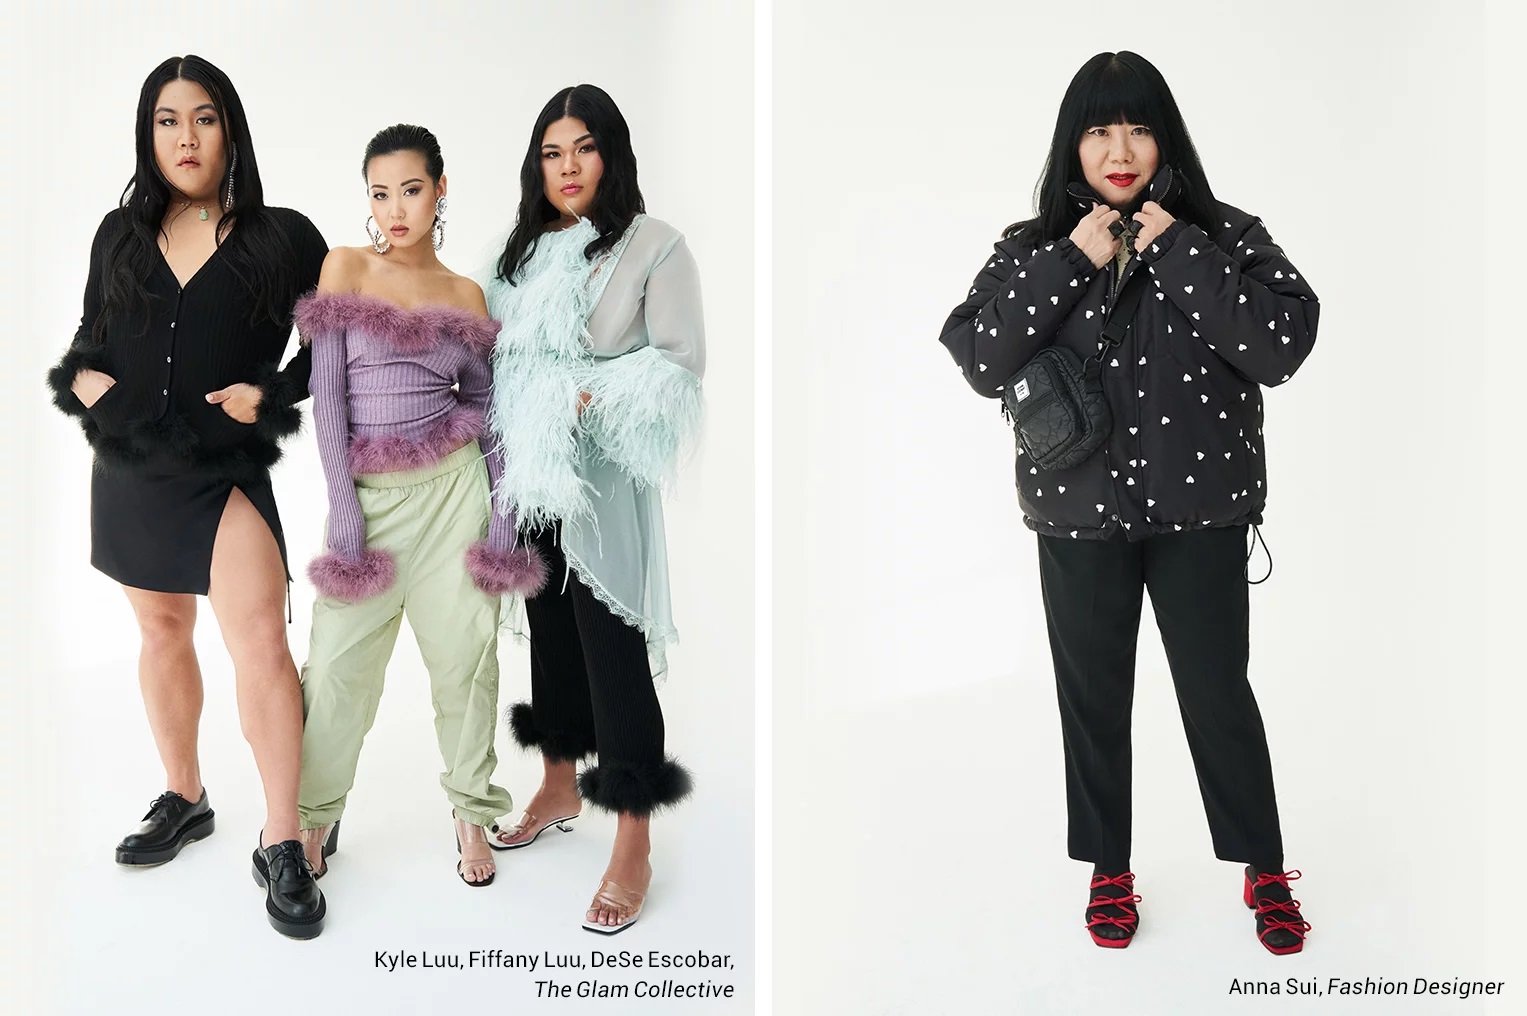 opening ceremony fall winter 2019 lookbook features an all-asian cast inspired by hong kong icons anita mui and leslie cheung - 01.jpg